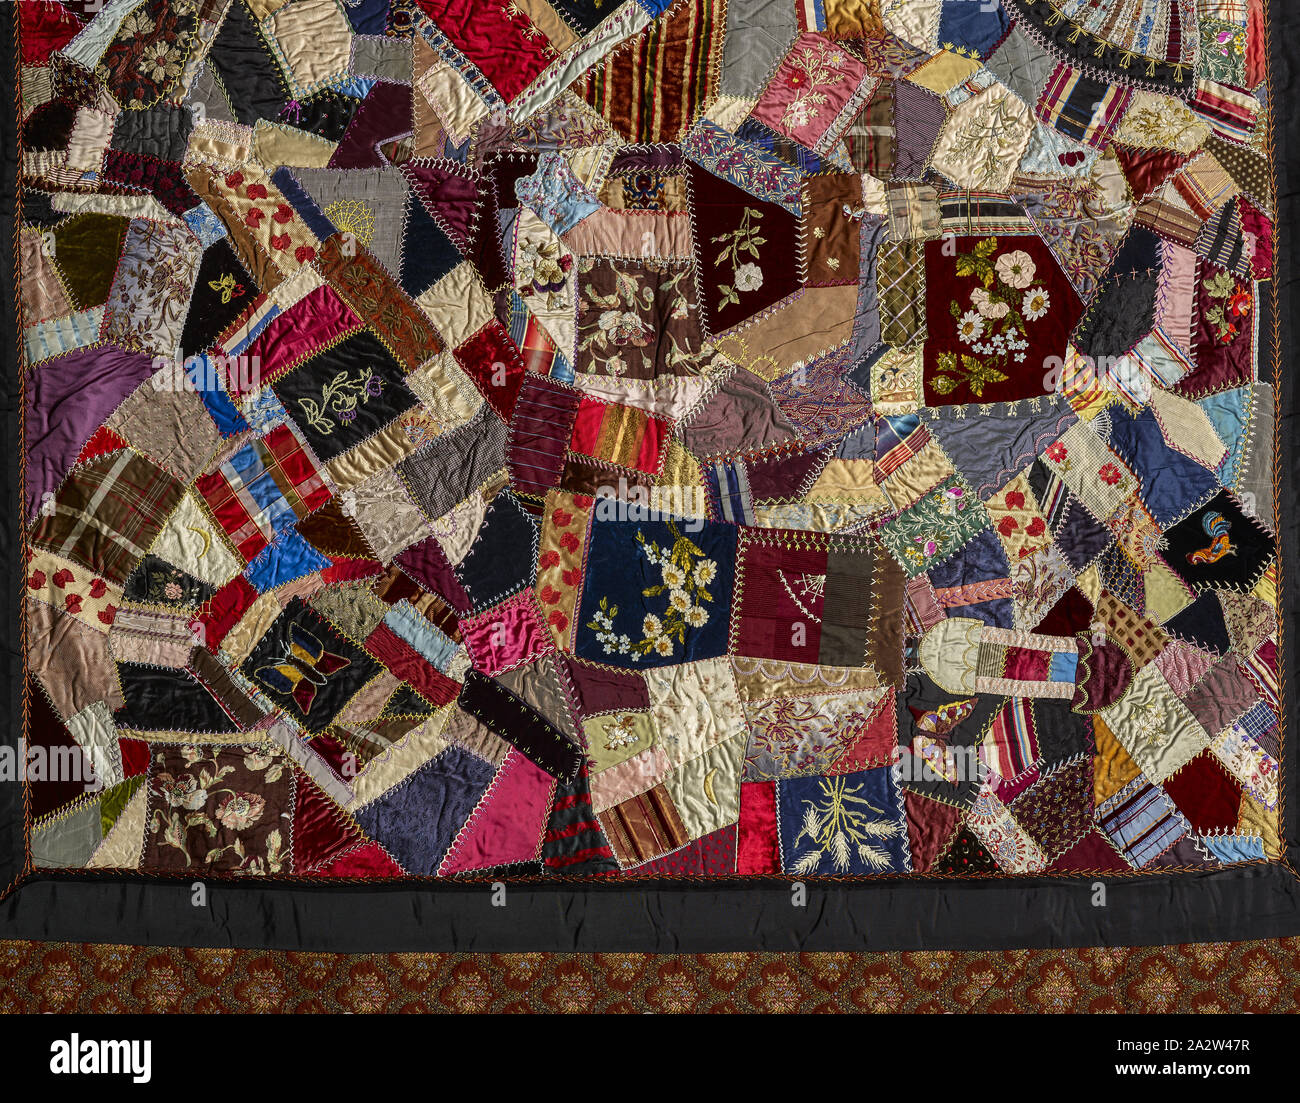 crazy quilt, Unknown, about 1885, silk, velvet, ribbons, synthetic fabric, pieced and embroidered, 85-1/2 x 81-3/4 in., American, Textile and Fashion Arts Stock Photo